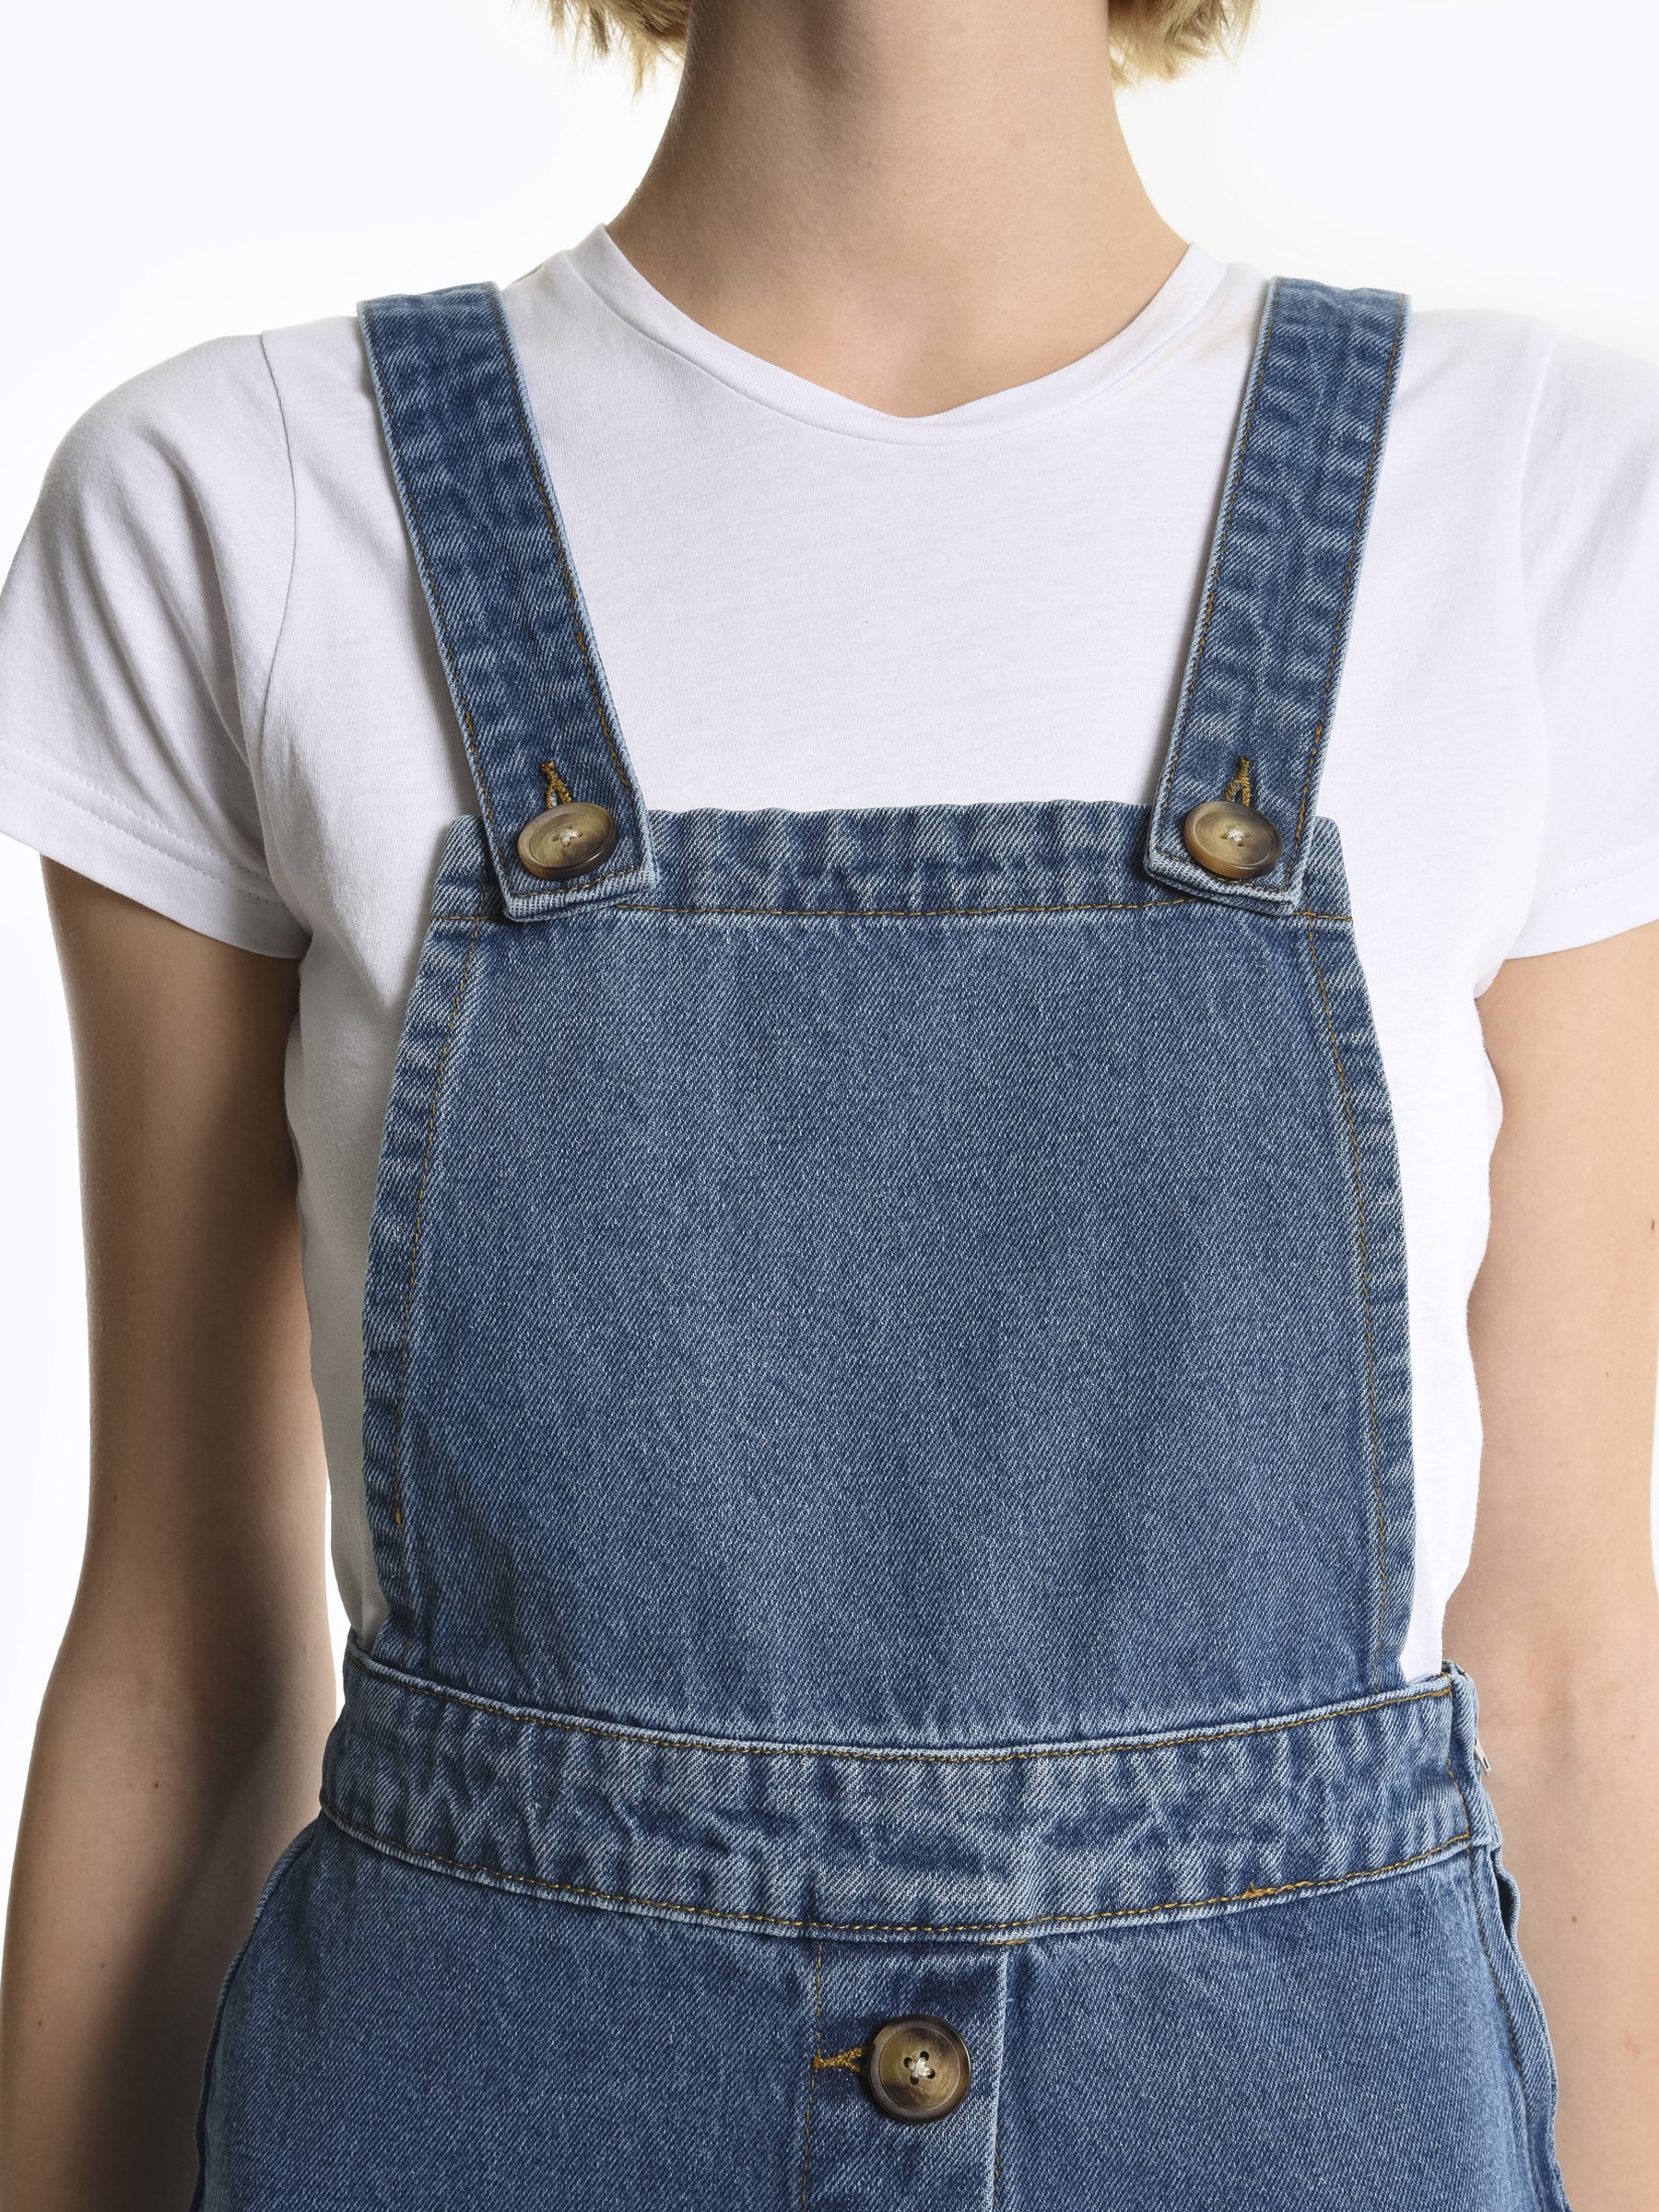 jeans dungaree skirt